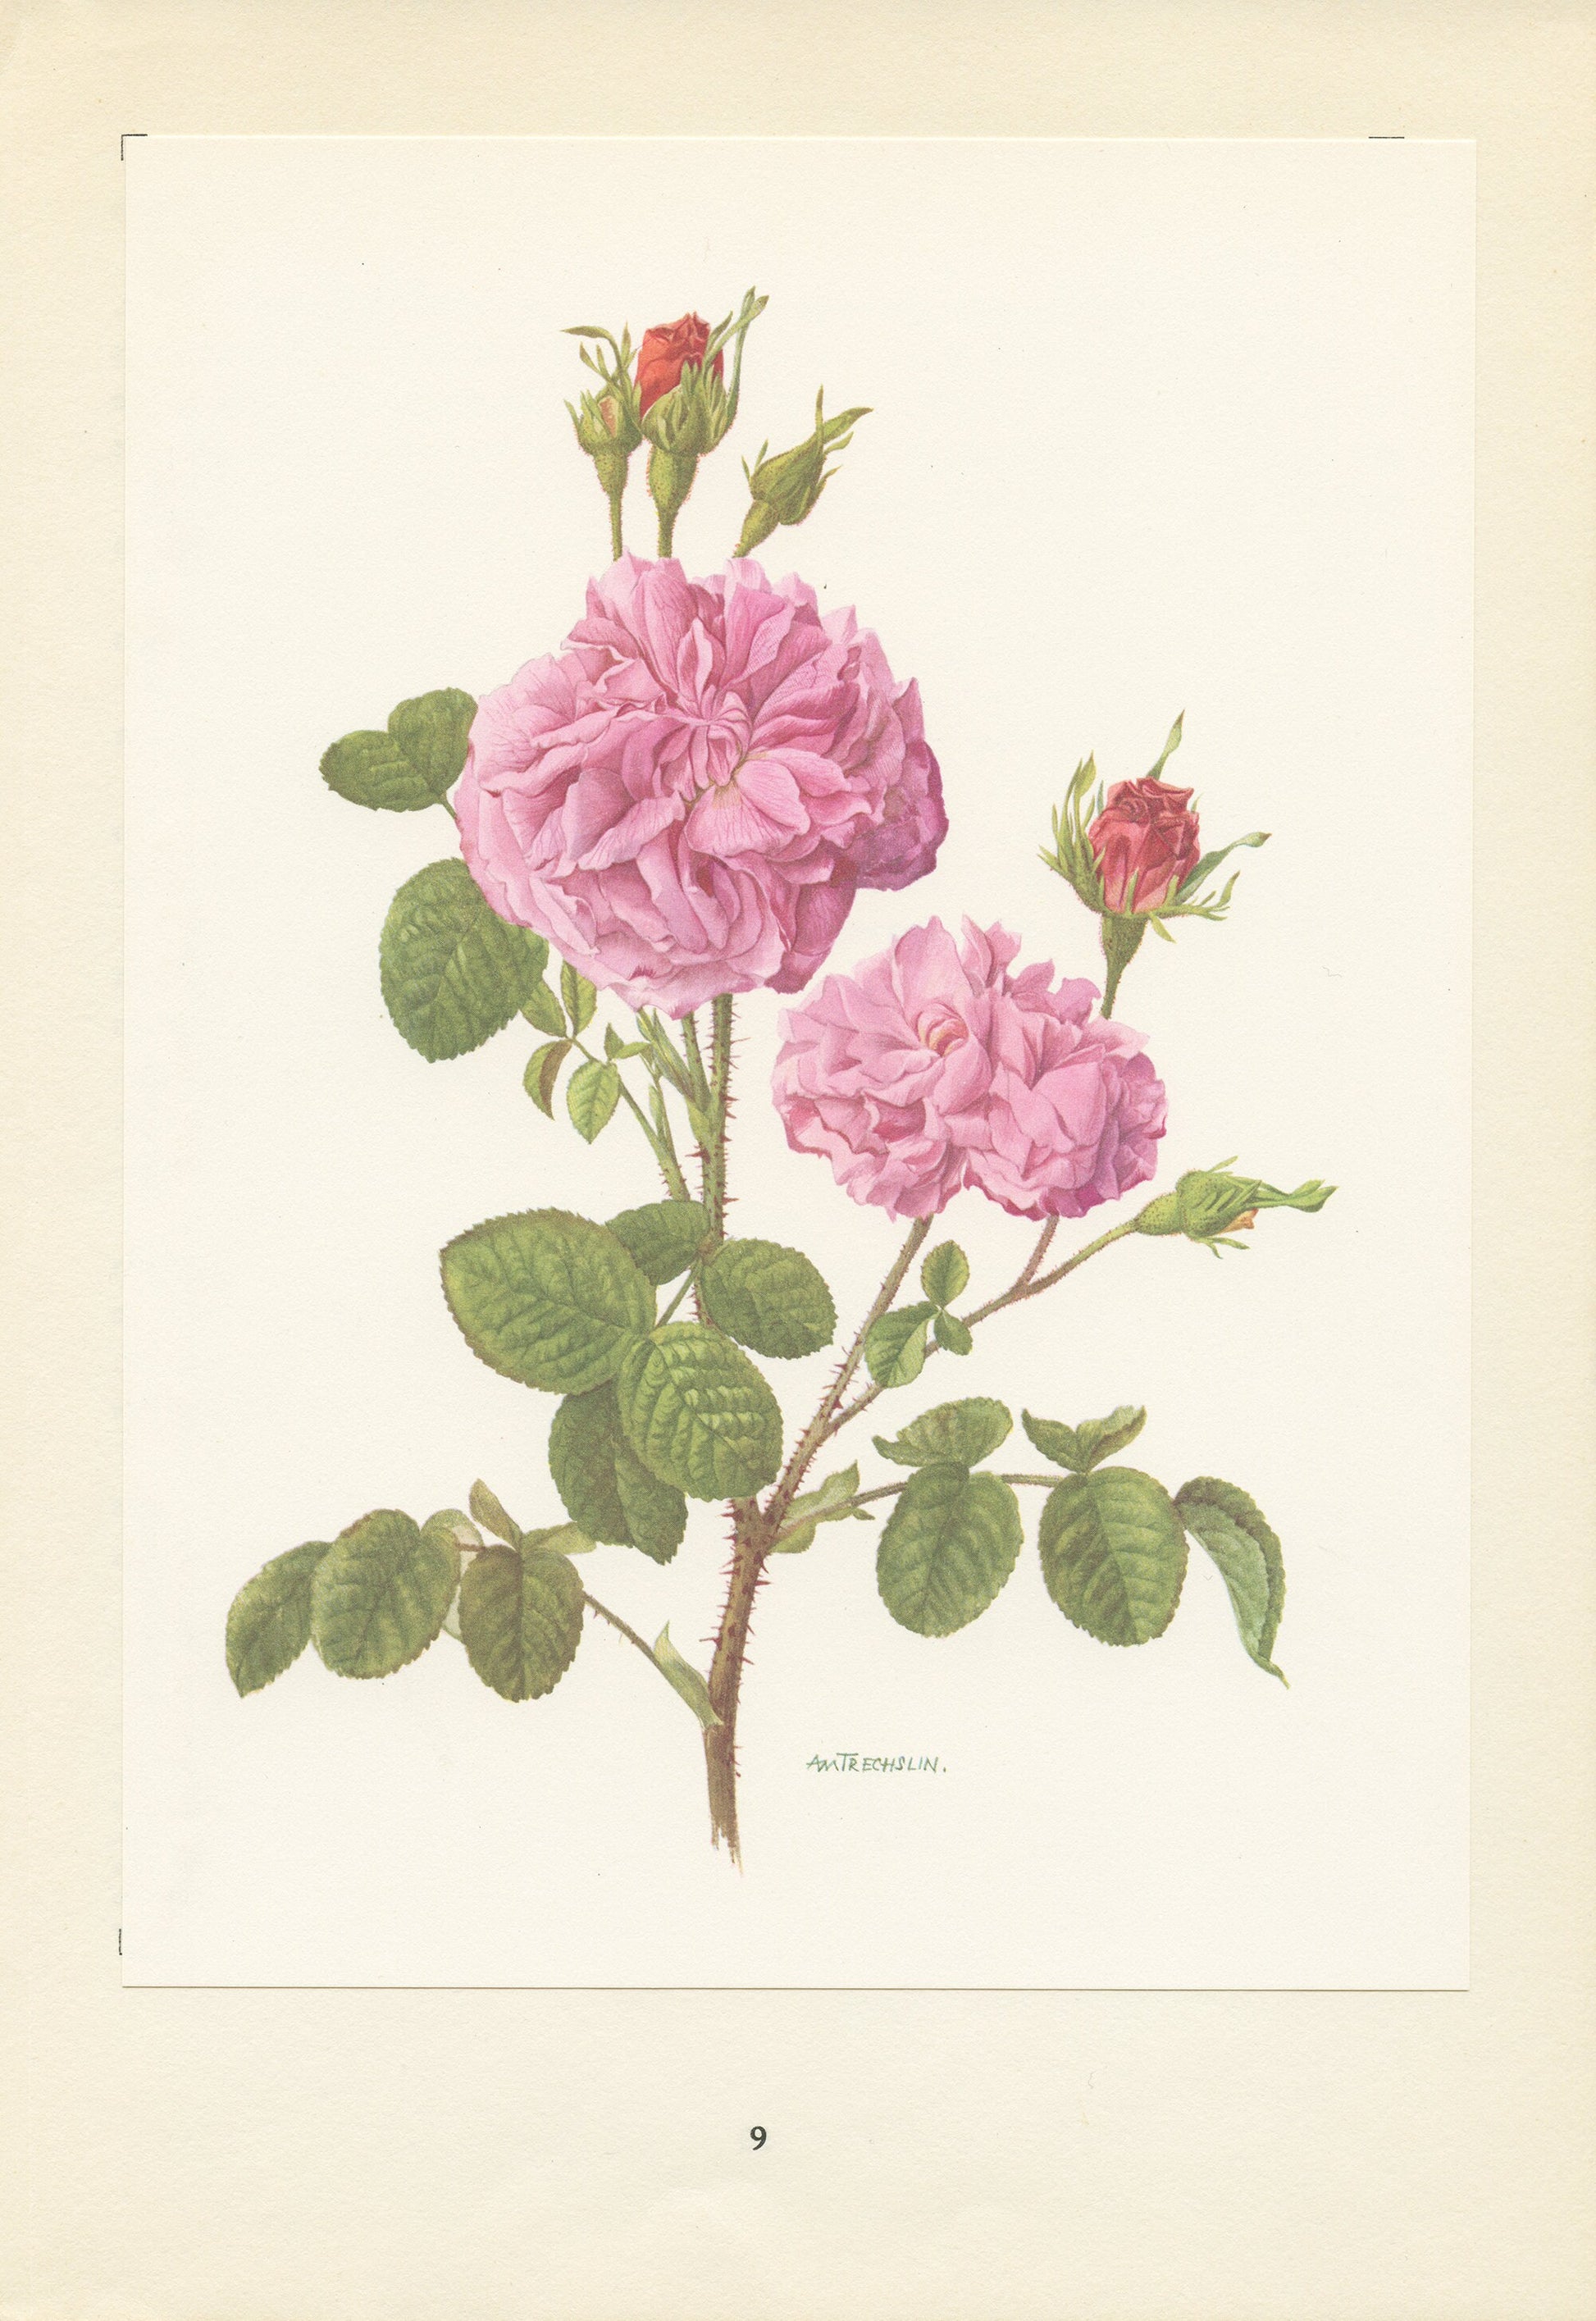 Rosa Gallica Damascena botanical print from 1962. Vintage Pink rose floral wall decor for French country cottage decor. Gardener gift plant